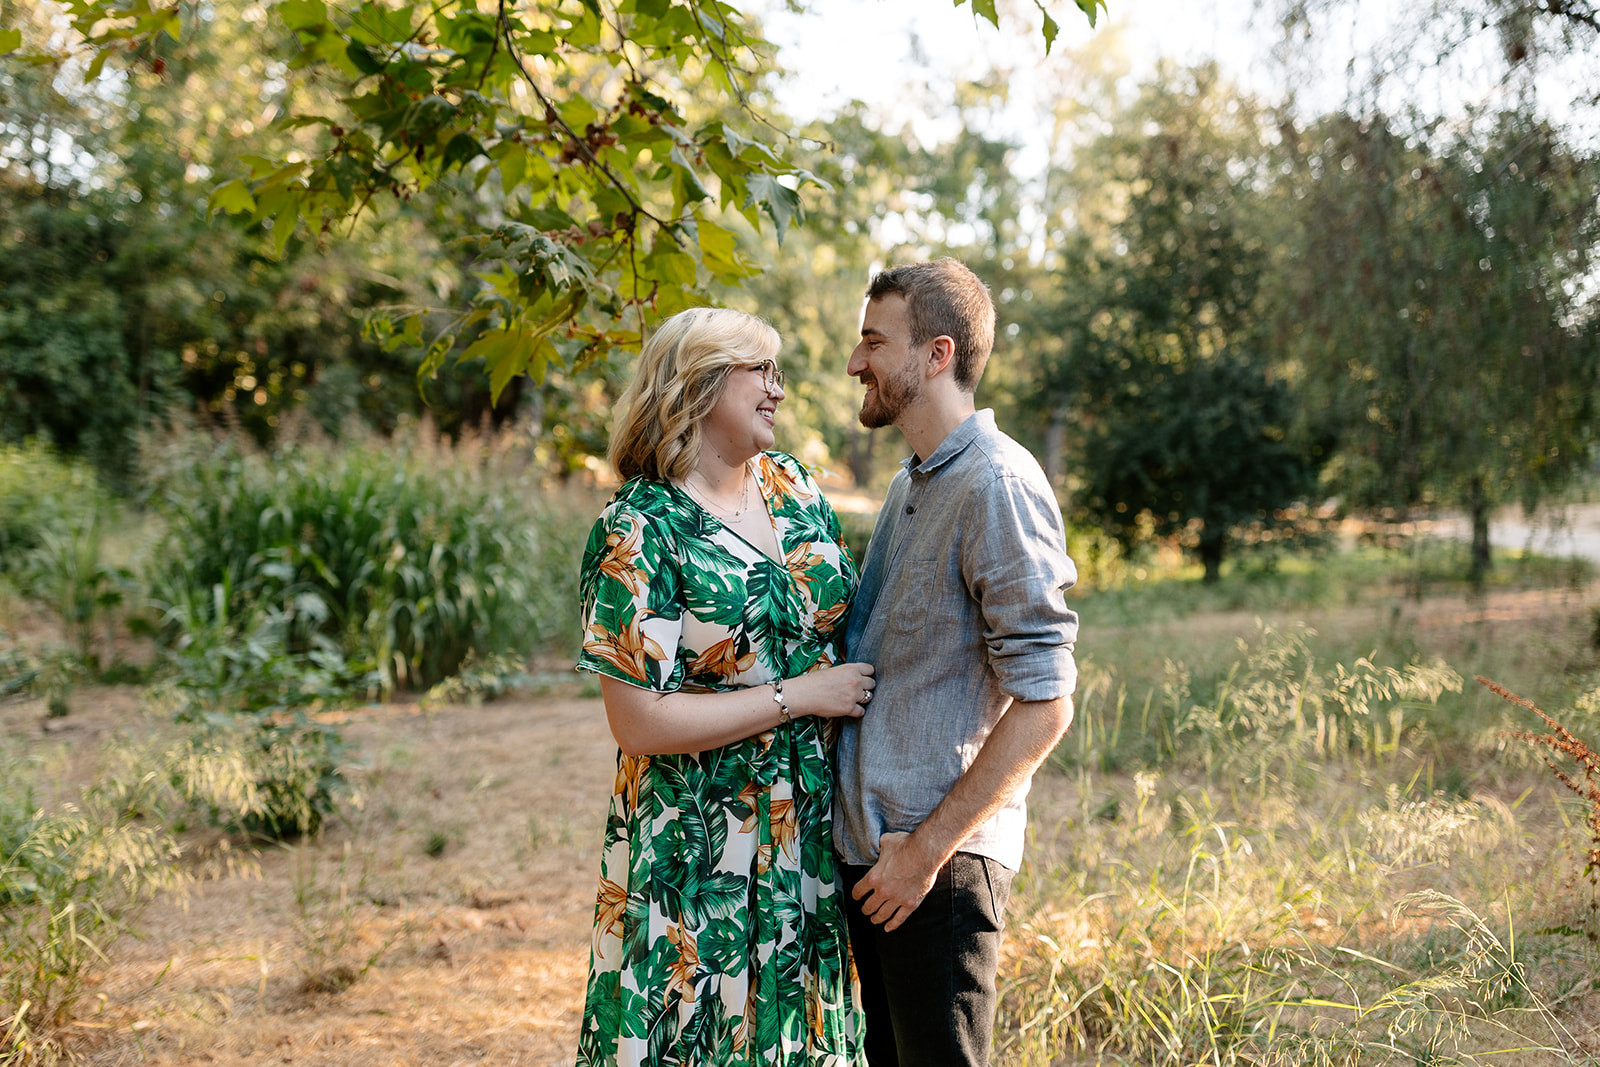 hiltscher park fullerton california engagement session sunny photoshoot southern california engagement photographer ring